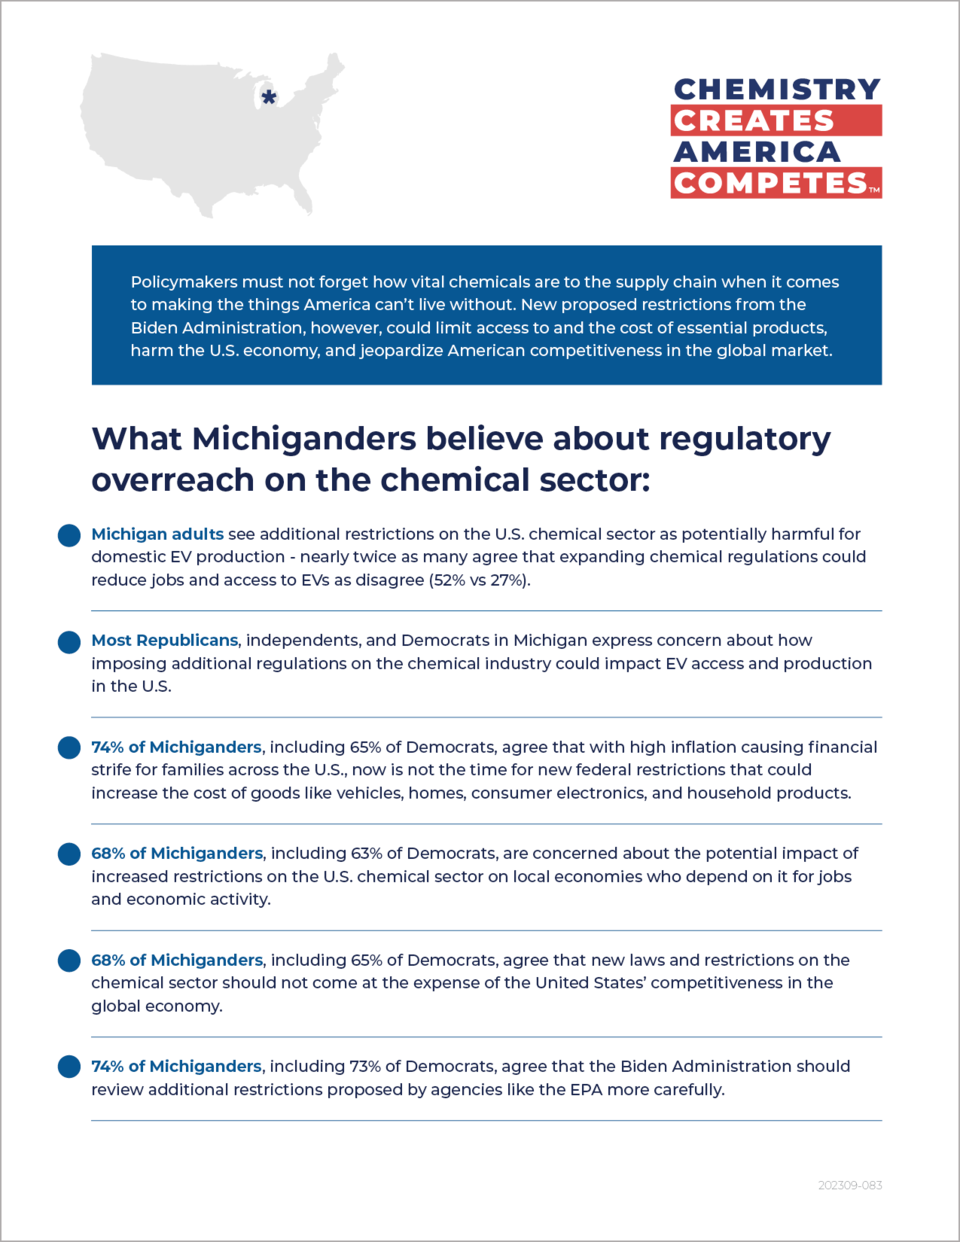 What Michiganders Believe About Regulatory Overreach on Chemical Sector - Fact Sheet